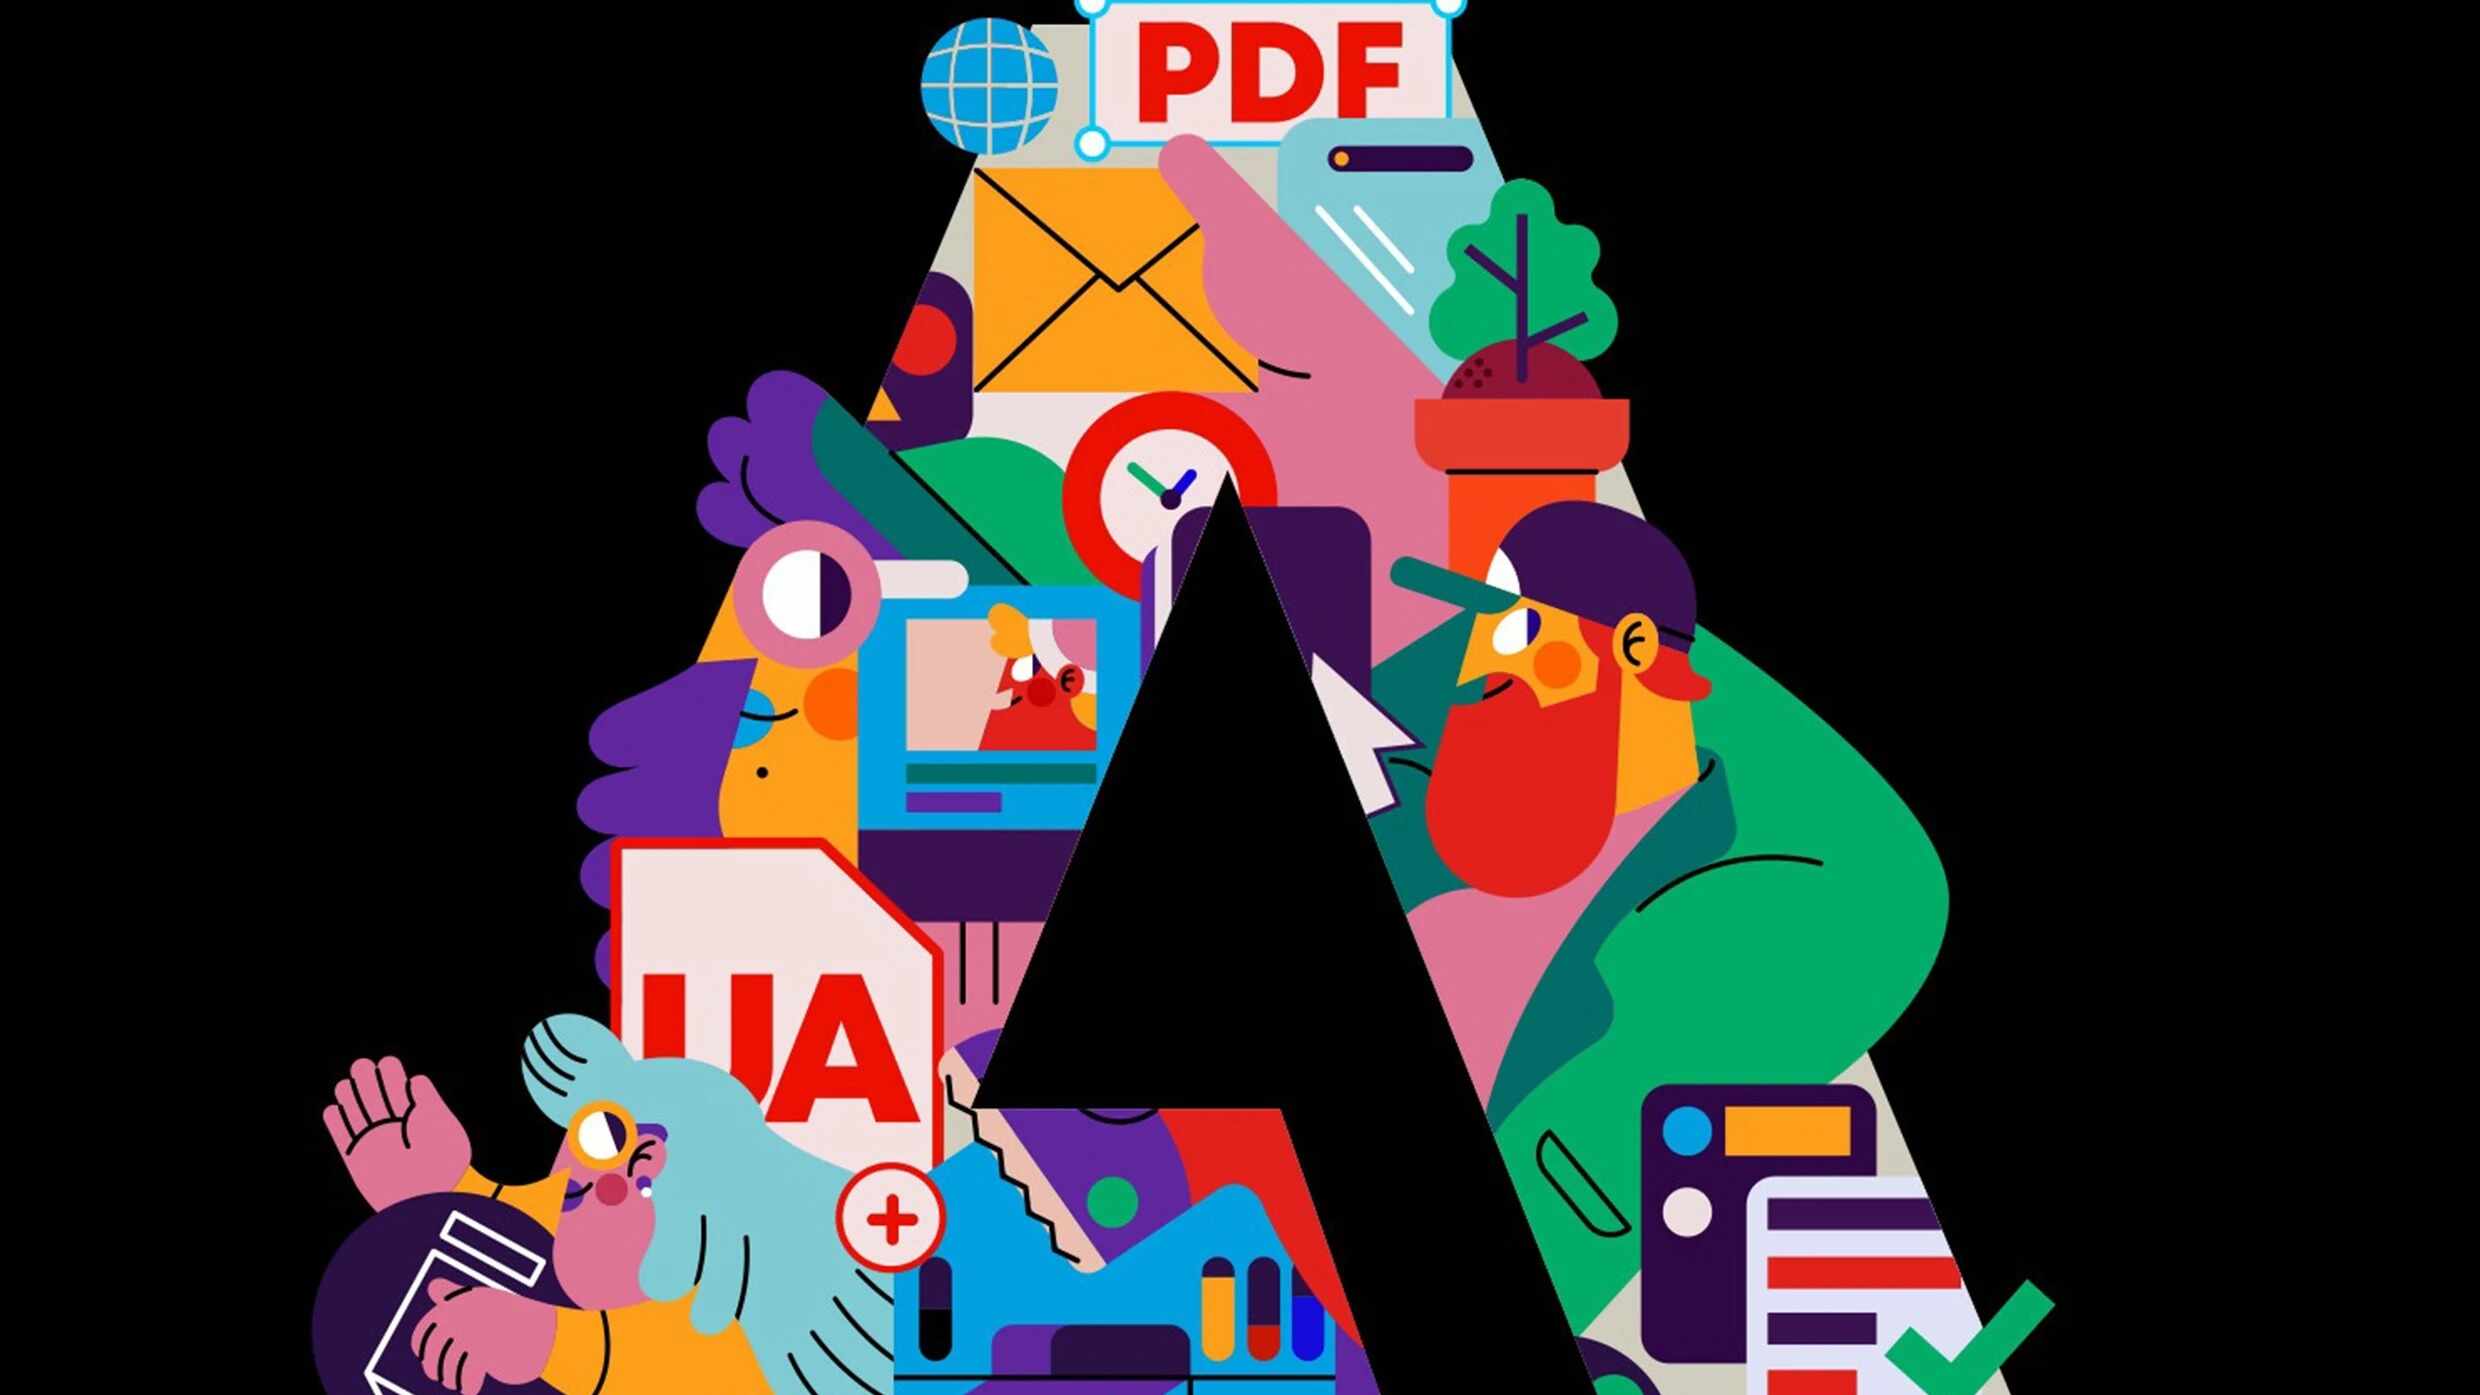 Adobe is supercharging the PDF with AI, and looking more like Microsoft Office 365 in the process